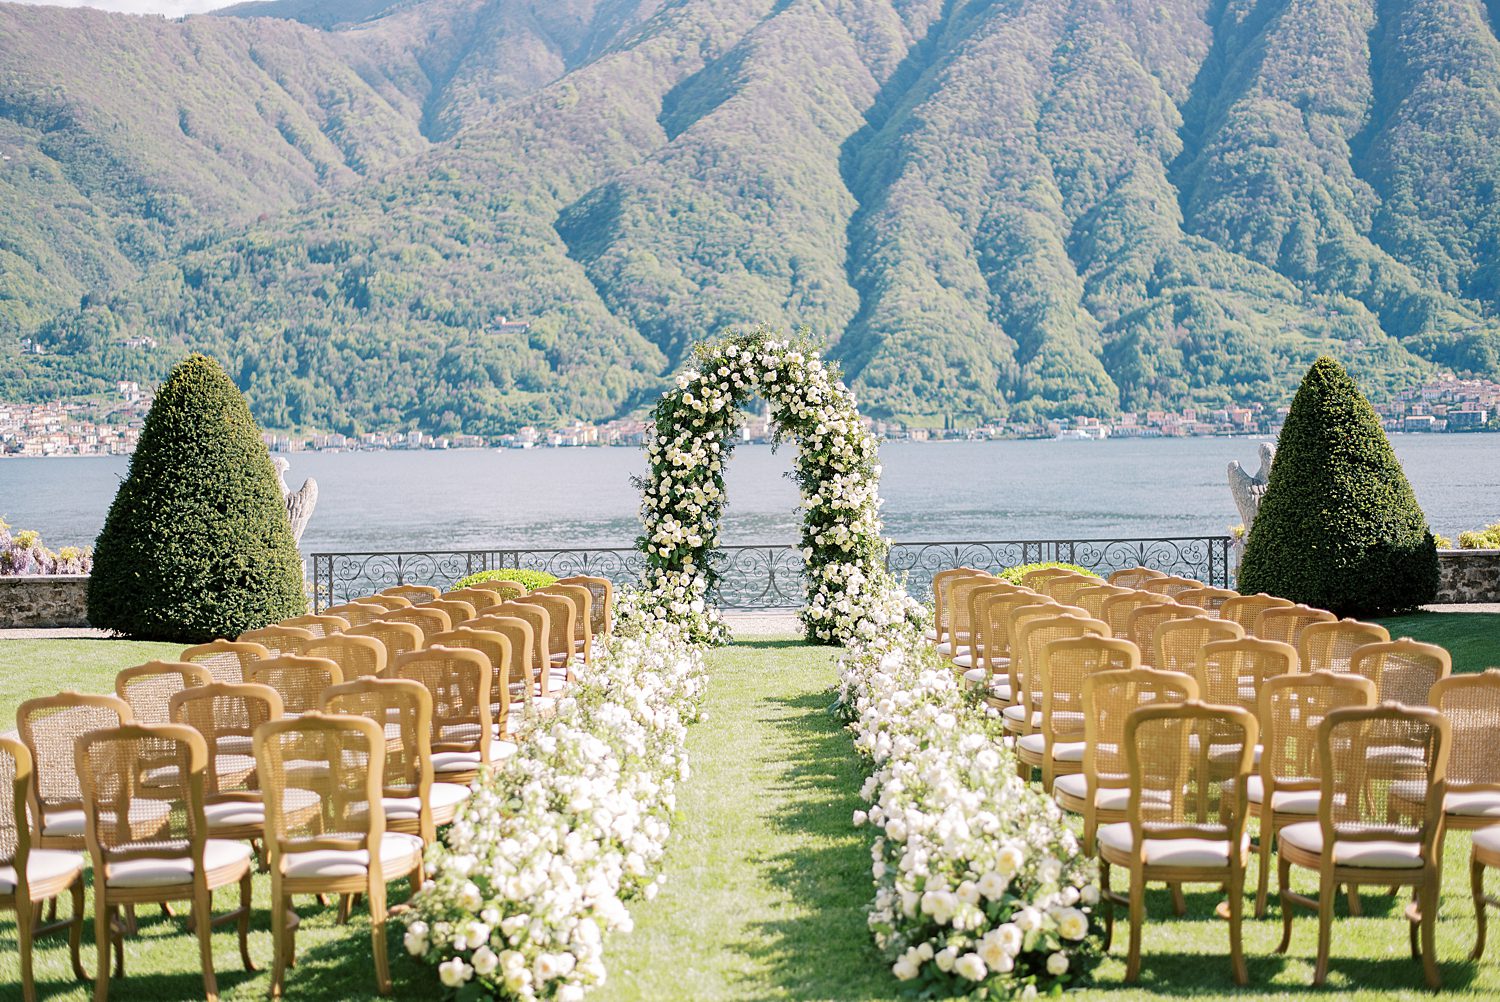 ceremony on lawn of Villa Balbiano with white roses lining aisle 